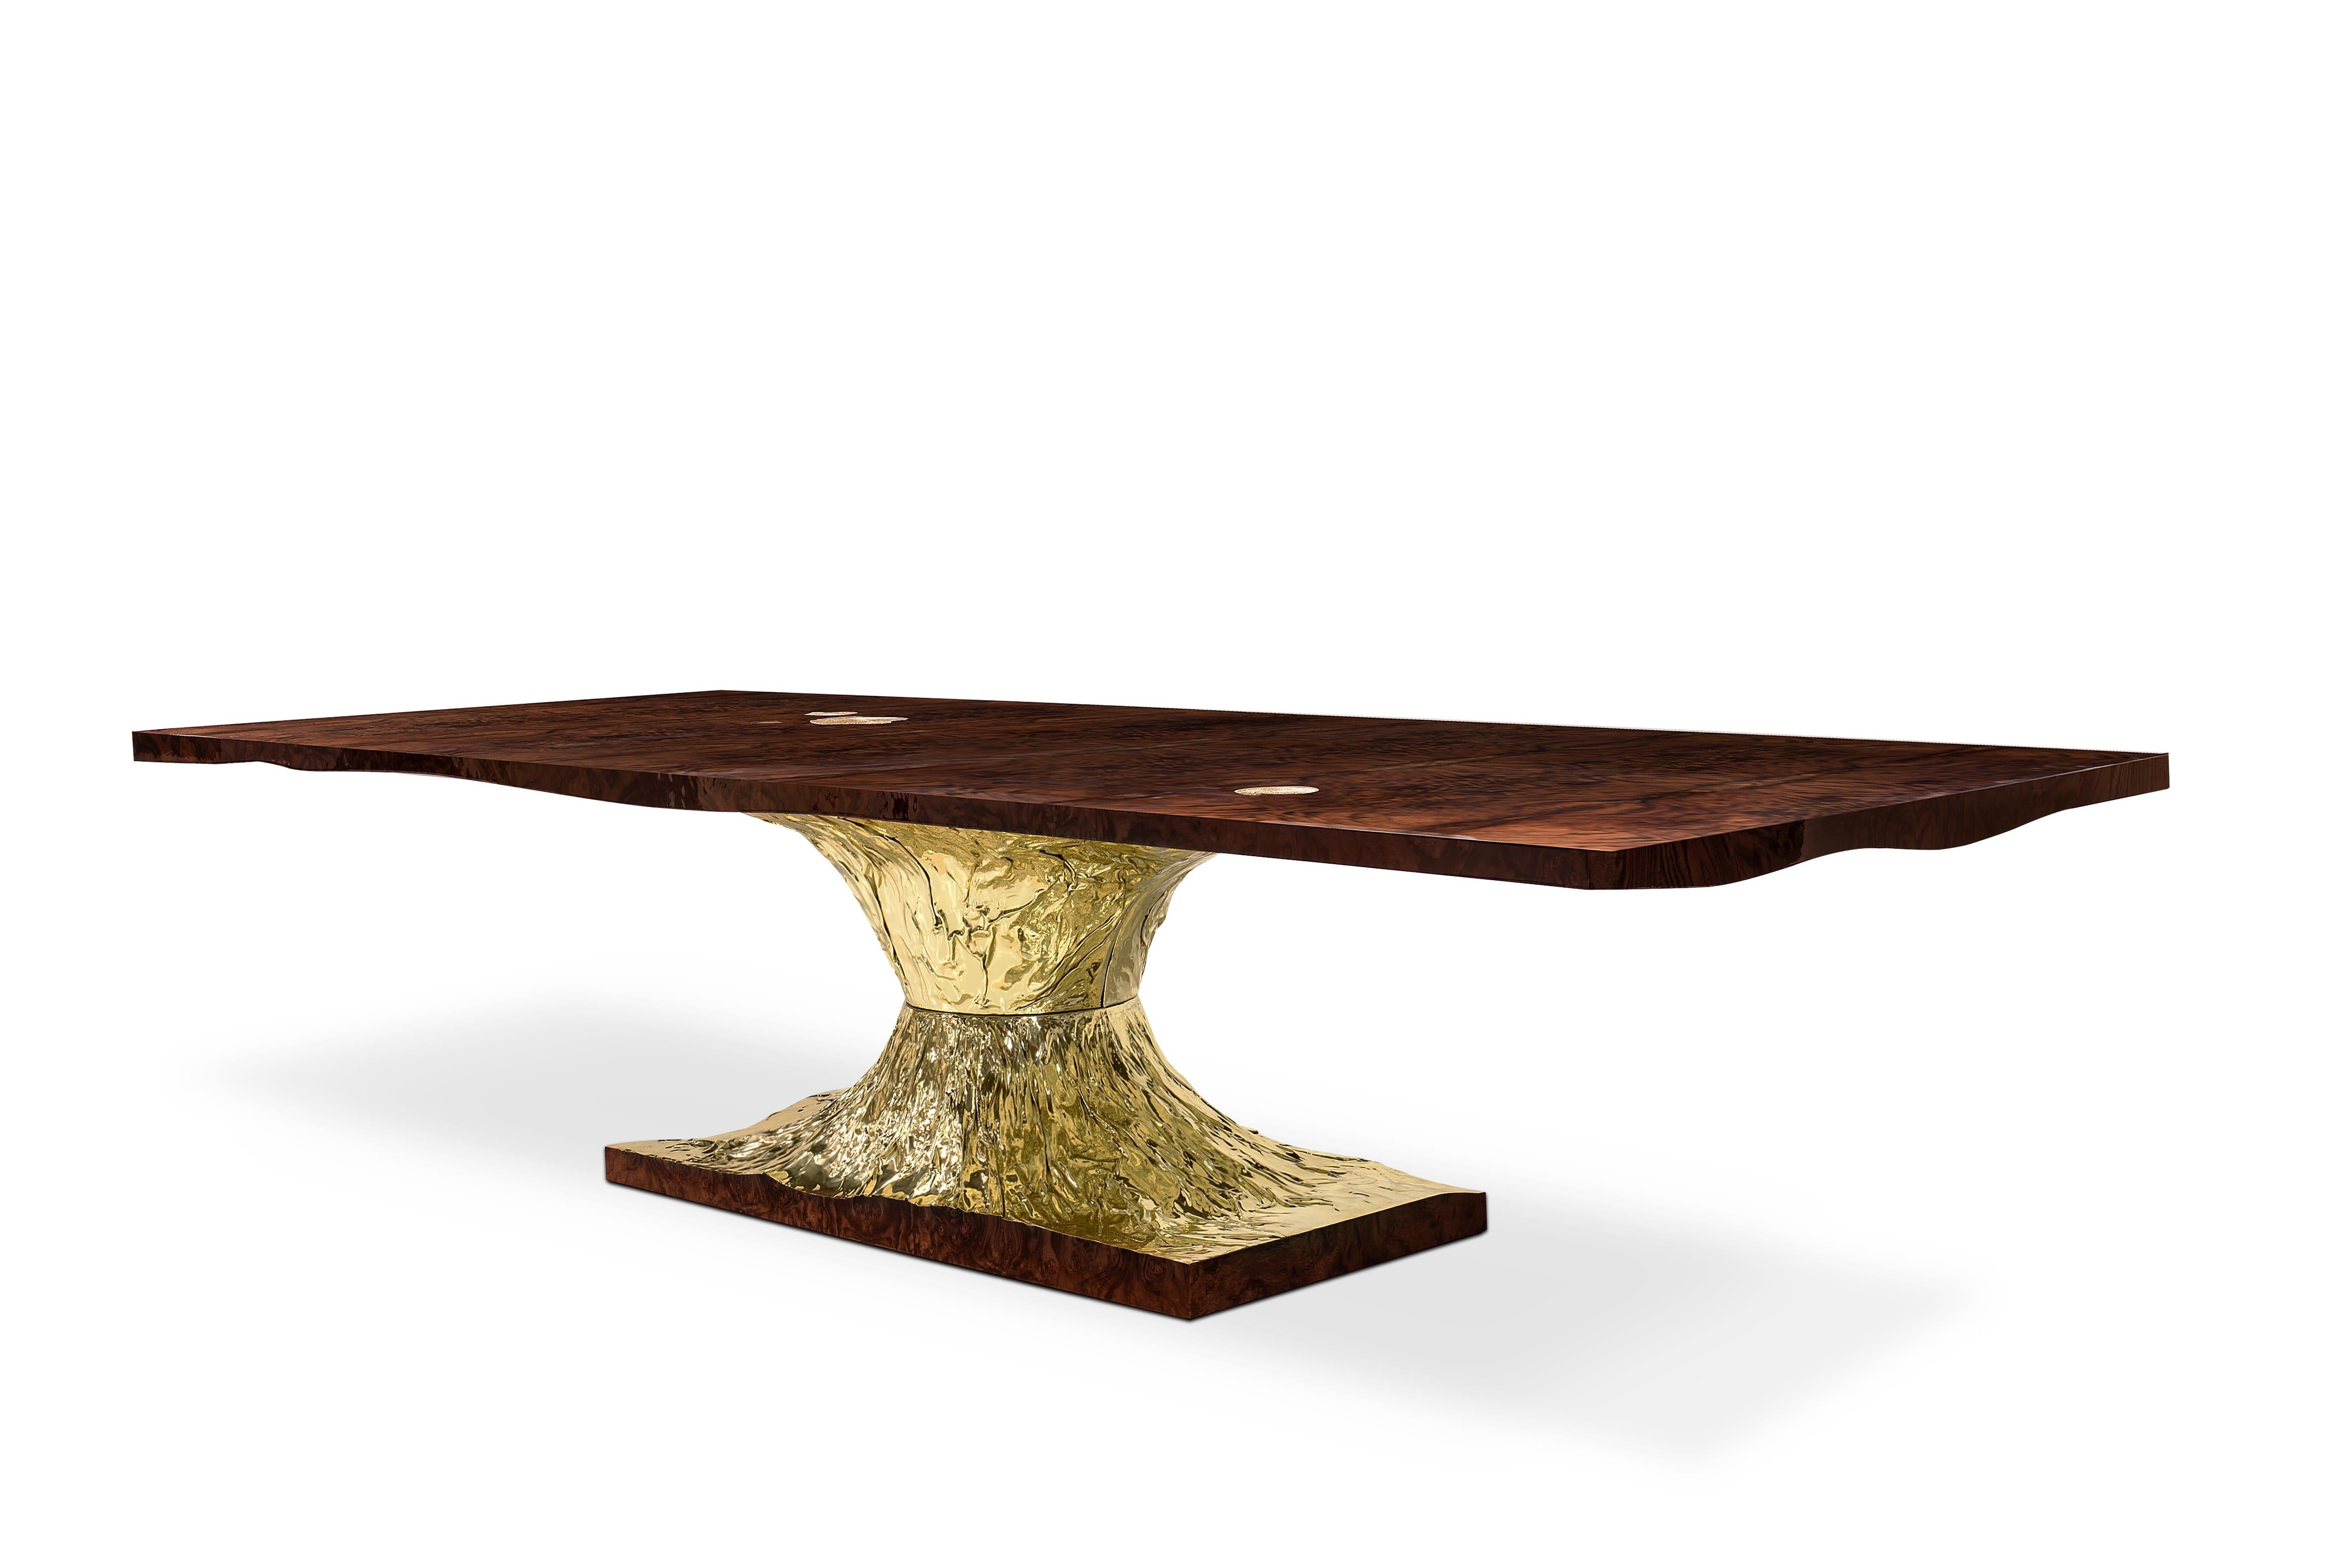 After the huge success of Metamorphosis Series, Boca do Lobo creates Metamorphosis Dining Table in order to strengthen this unique concept. This luxury dining table has come to symbolize the evolutionary history of life, representing the last stage